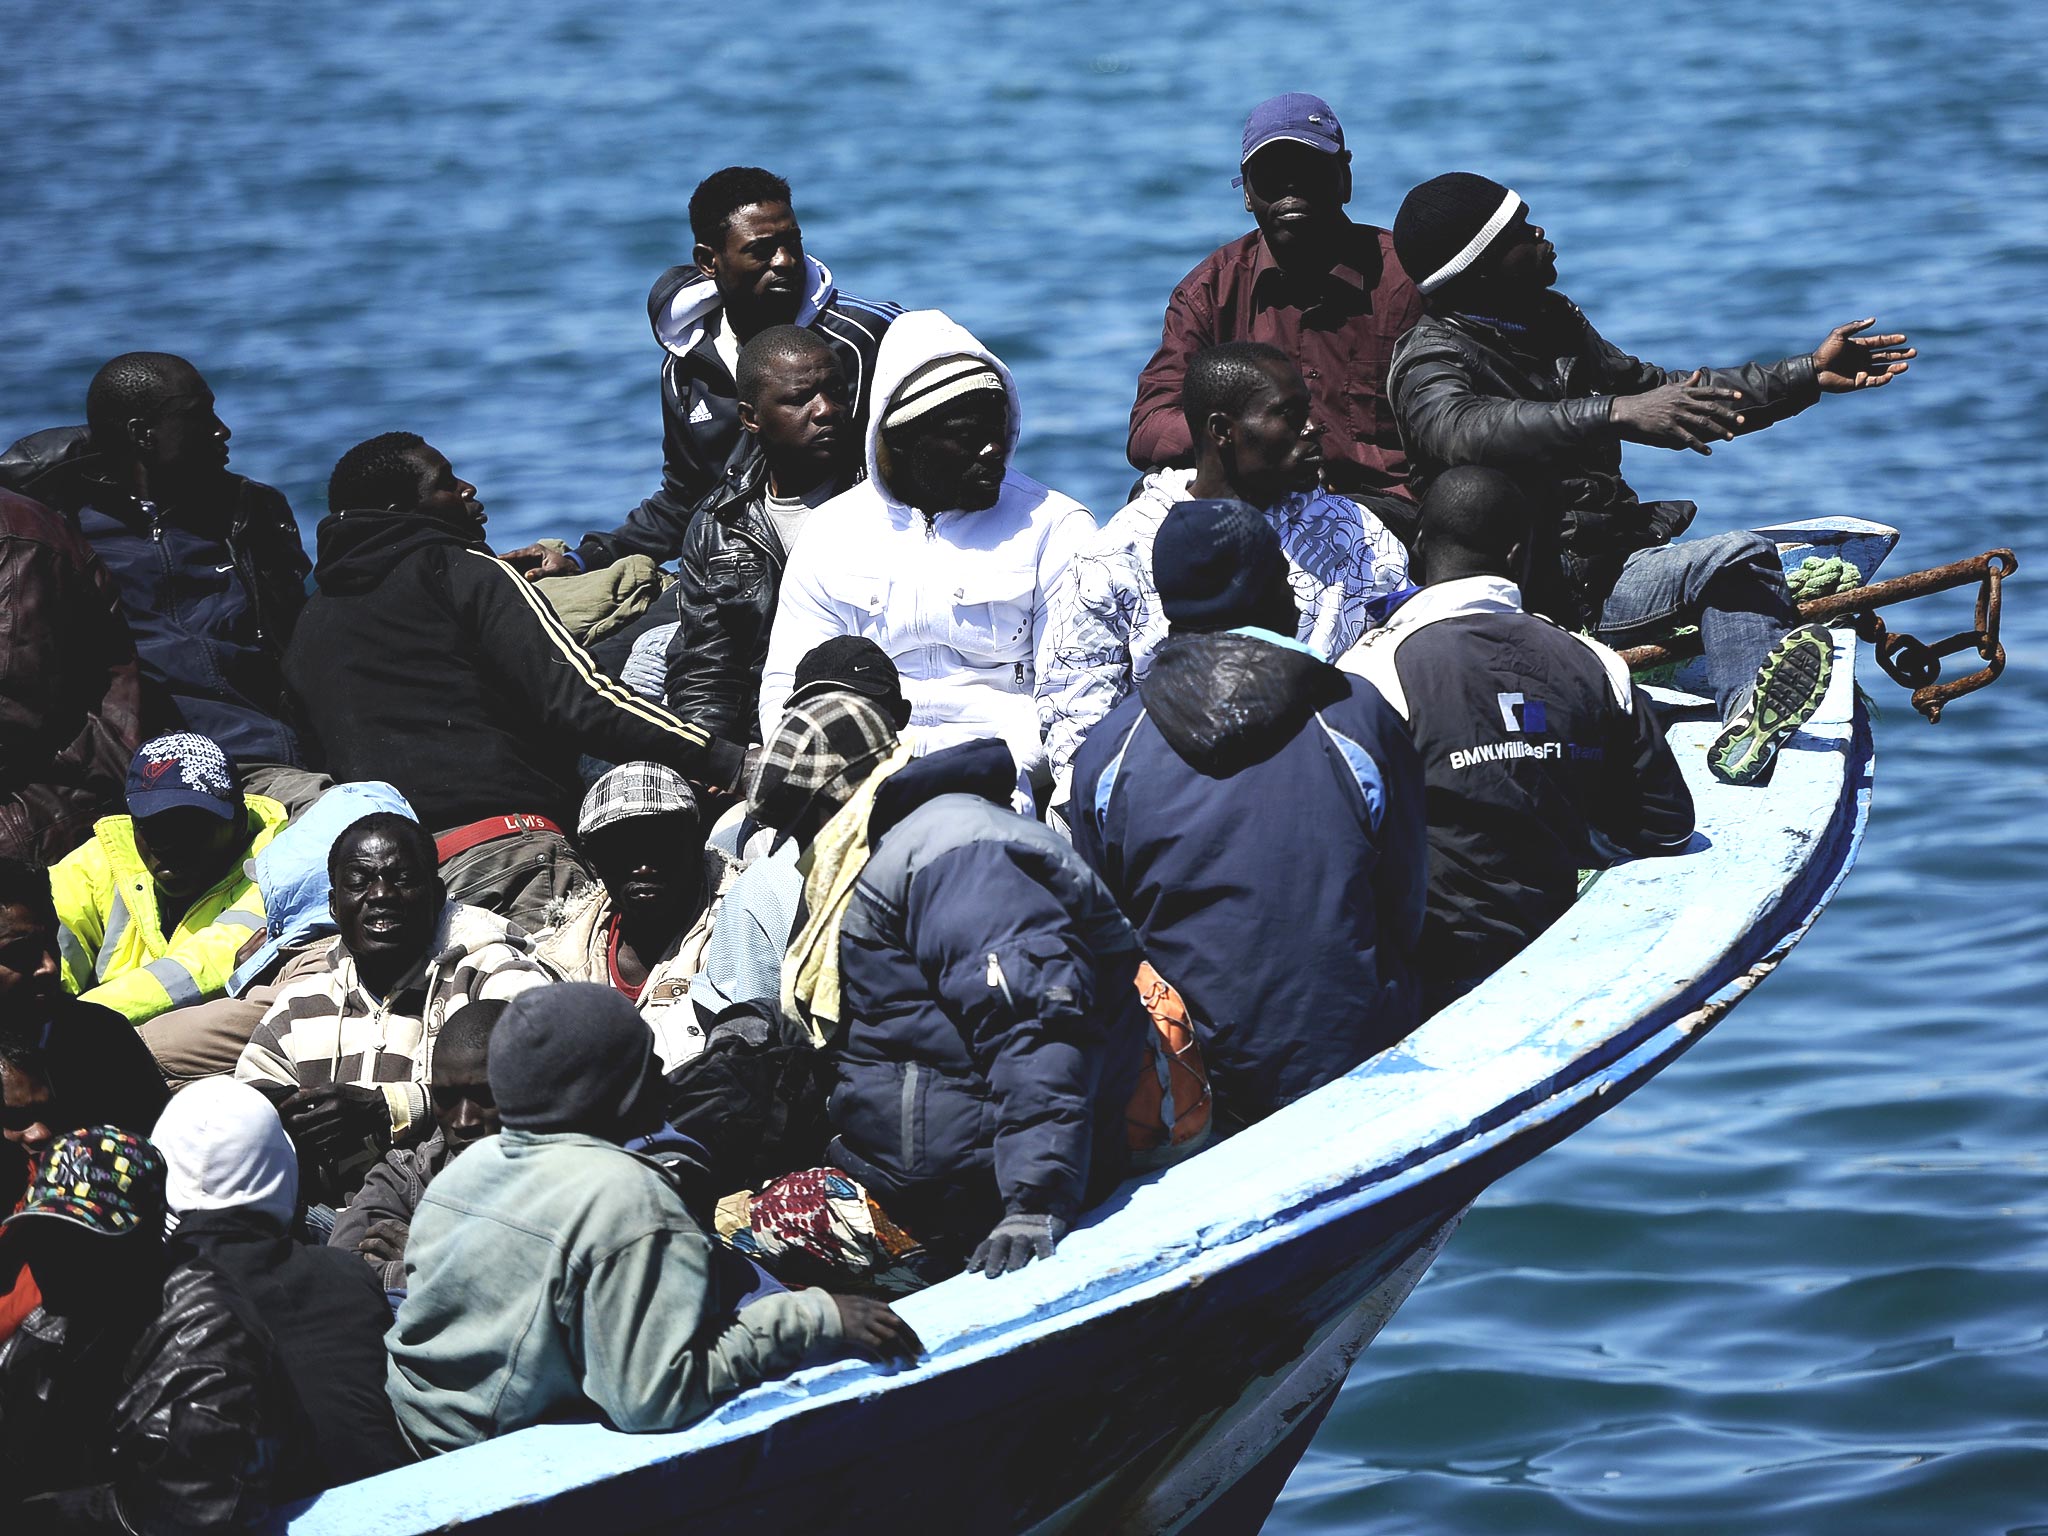 A boat with more 200 people aboard arrives from Libya on the Italian island of Lampedusa back in 2011